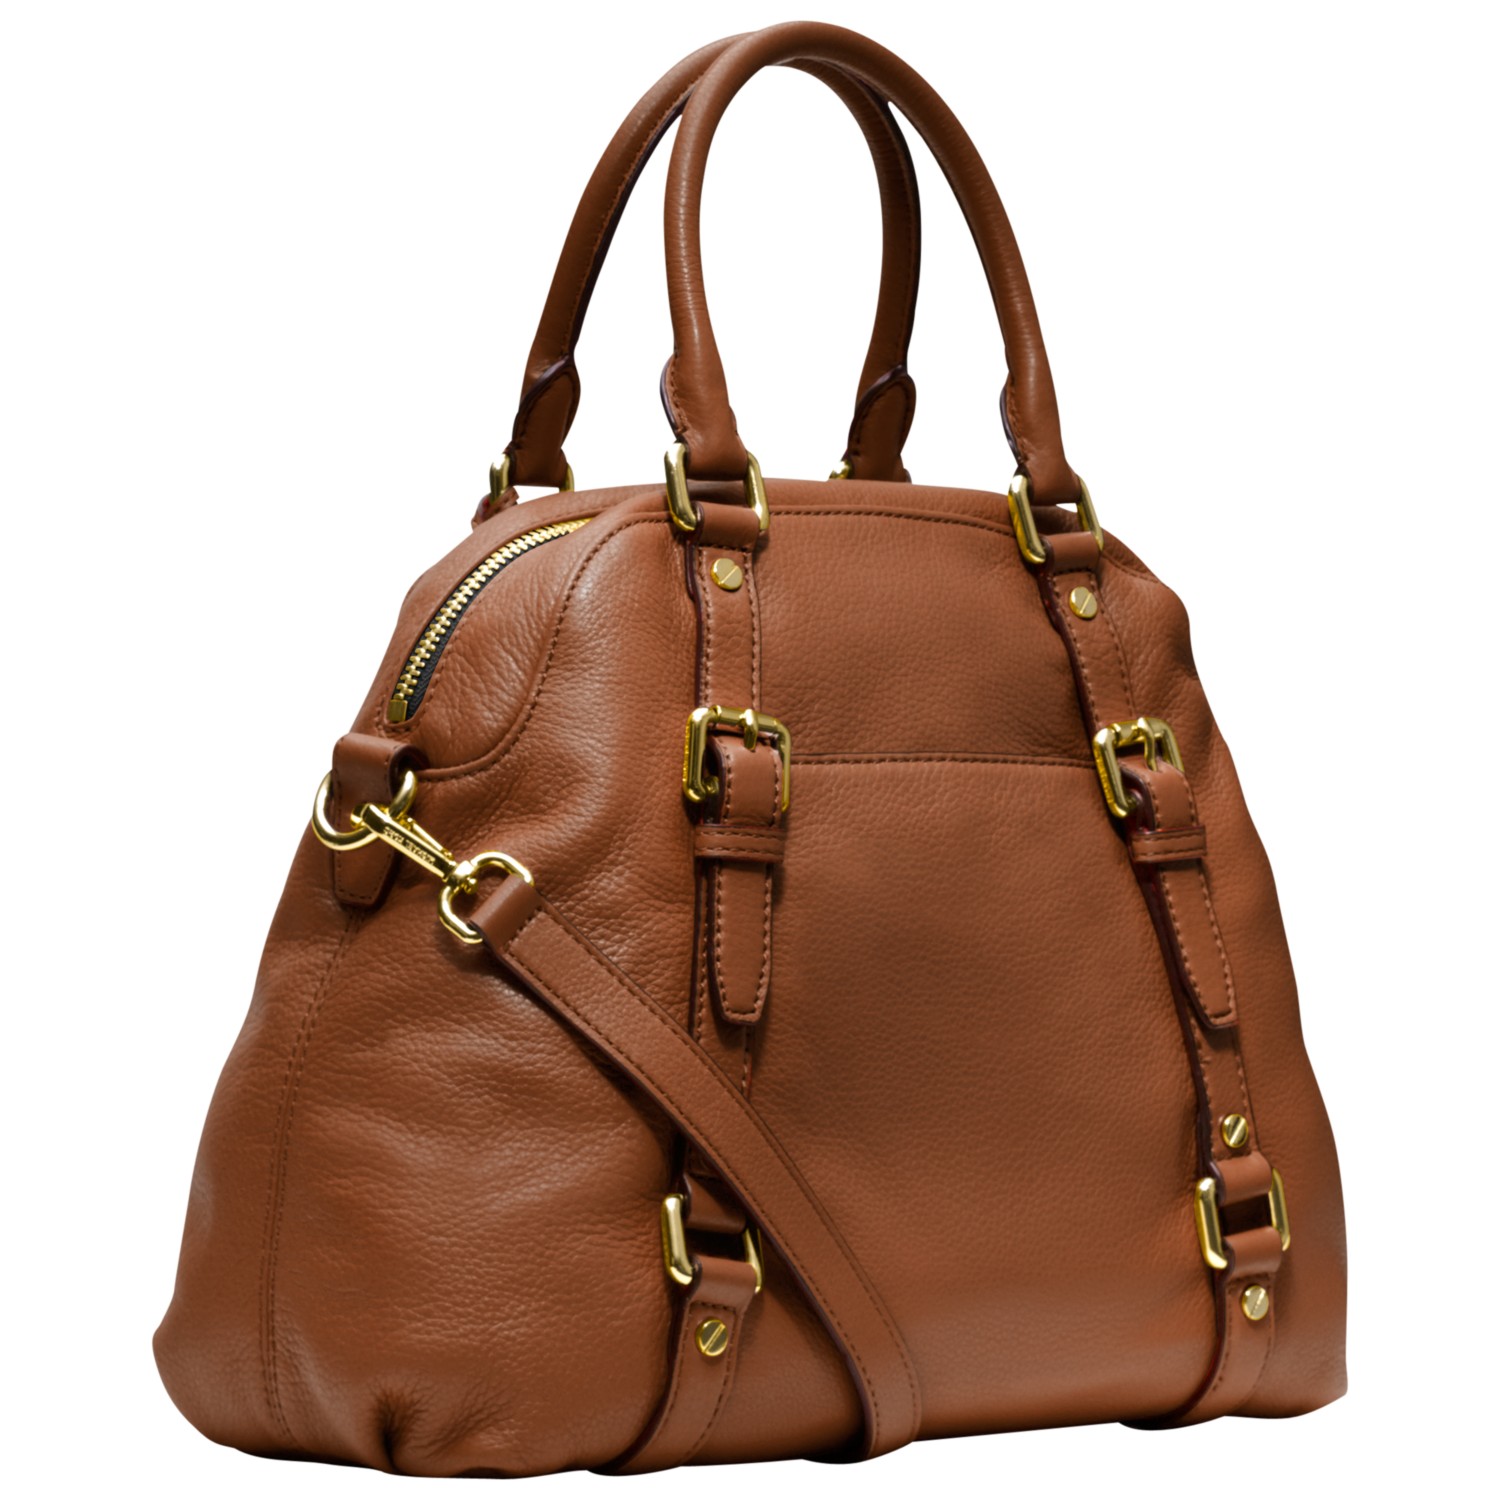 MICHAEL Michael Kors Bedford Leather Bowling Bag in Brown - Lyst